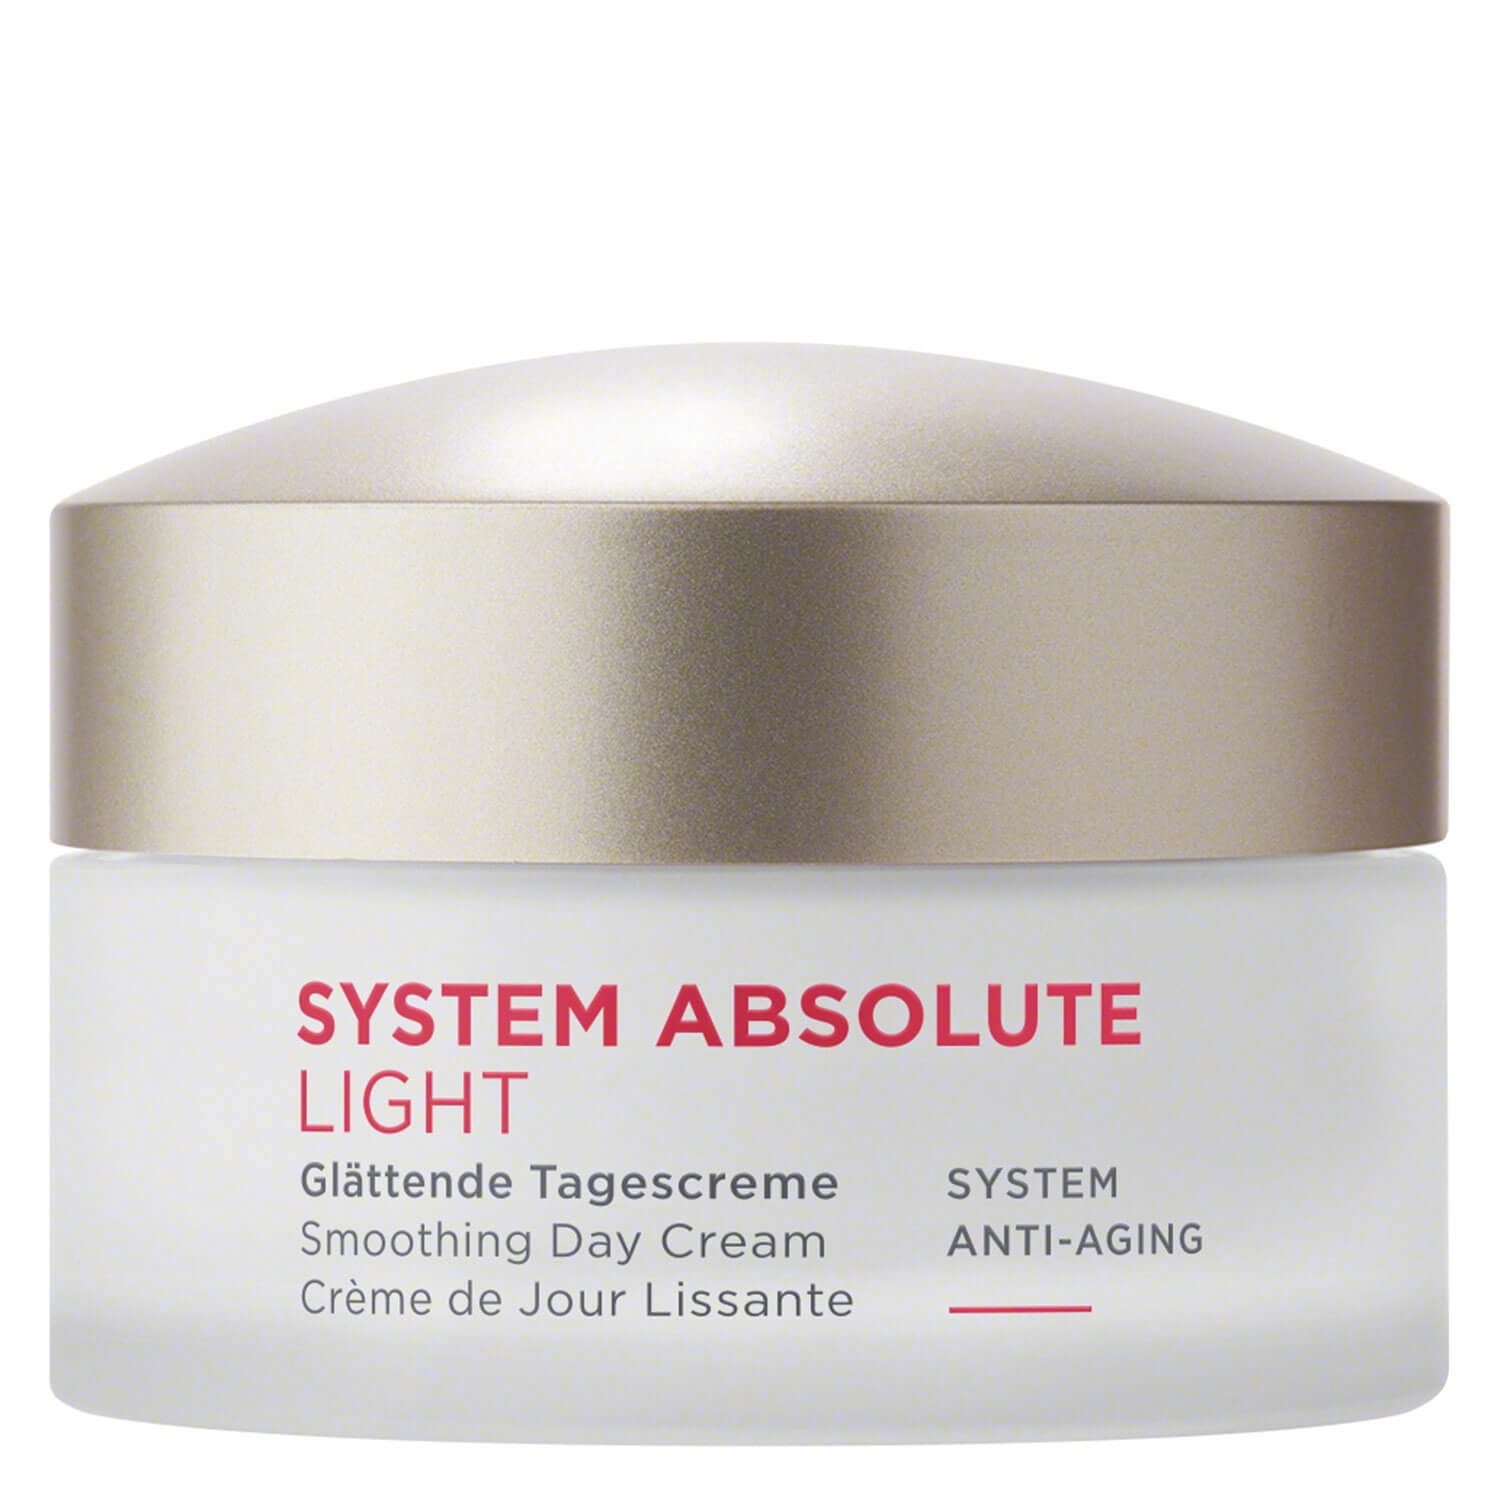 Product image from System Absolute - Anti-Aging Glättende Tagescreme Light